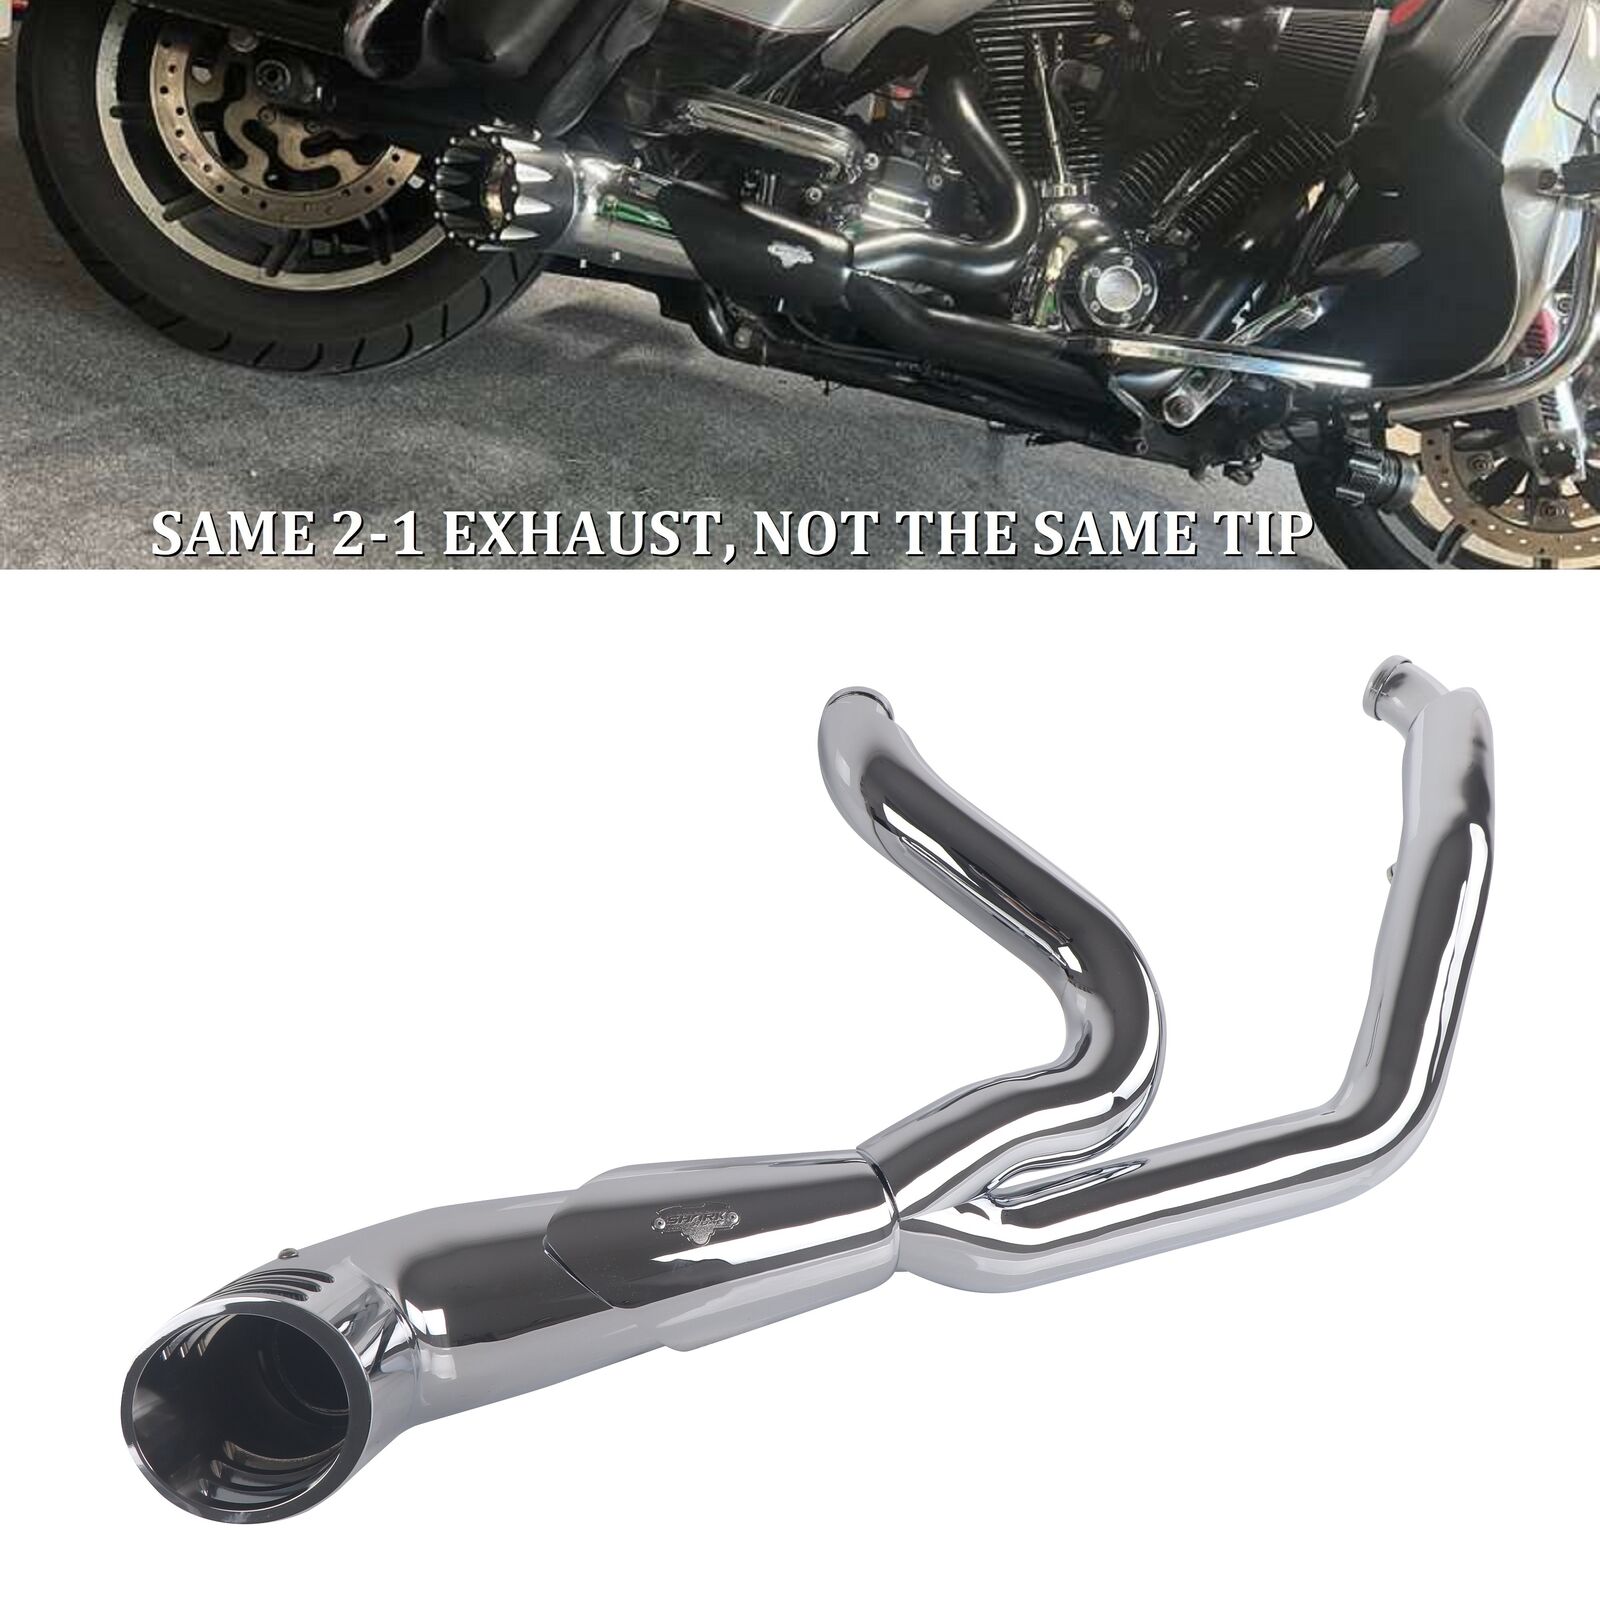 SHARKROAD 2 Into 1 Exhaust Pipes for Harley 1995-2016 Full Exhaust System